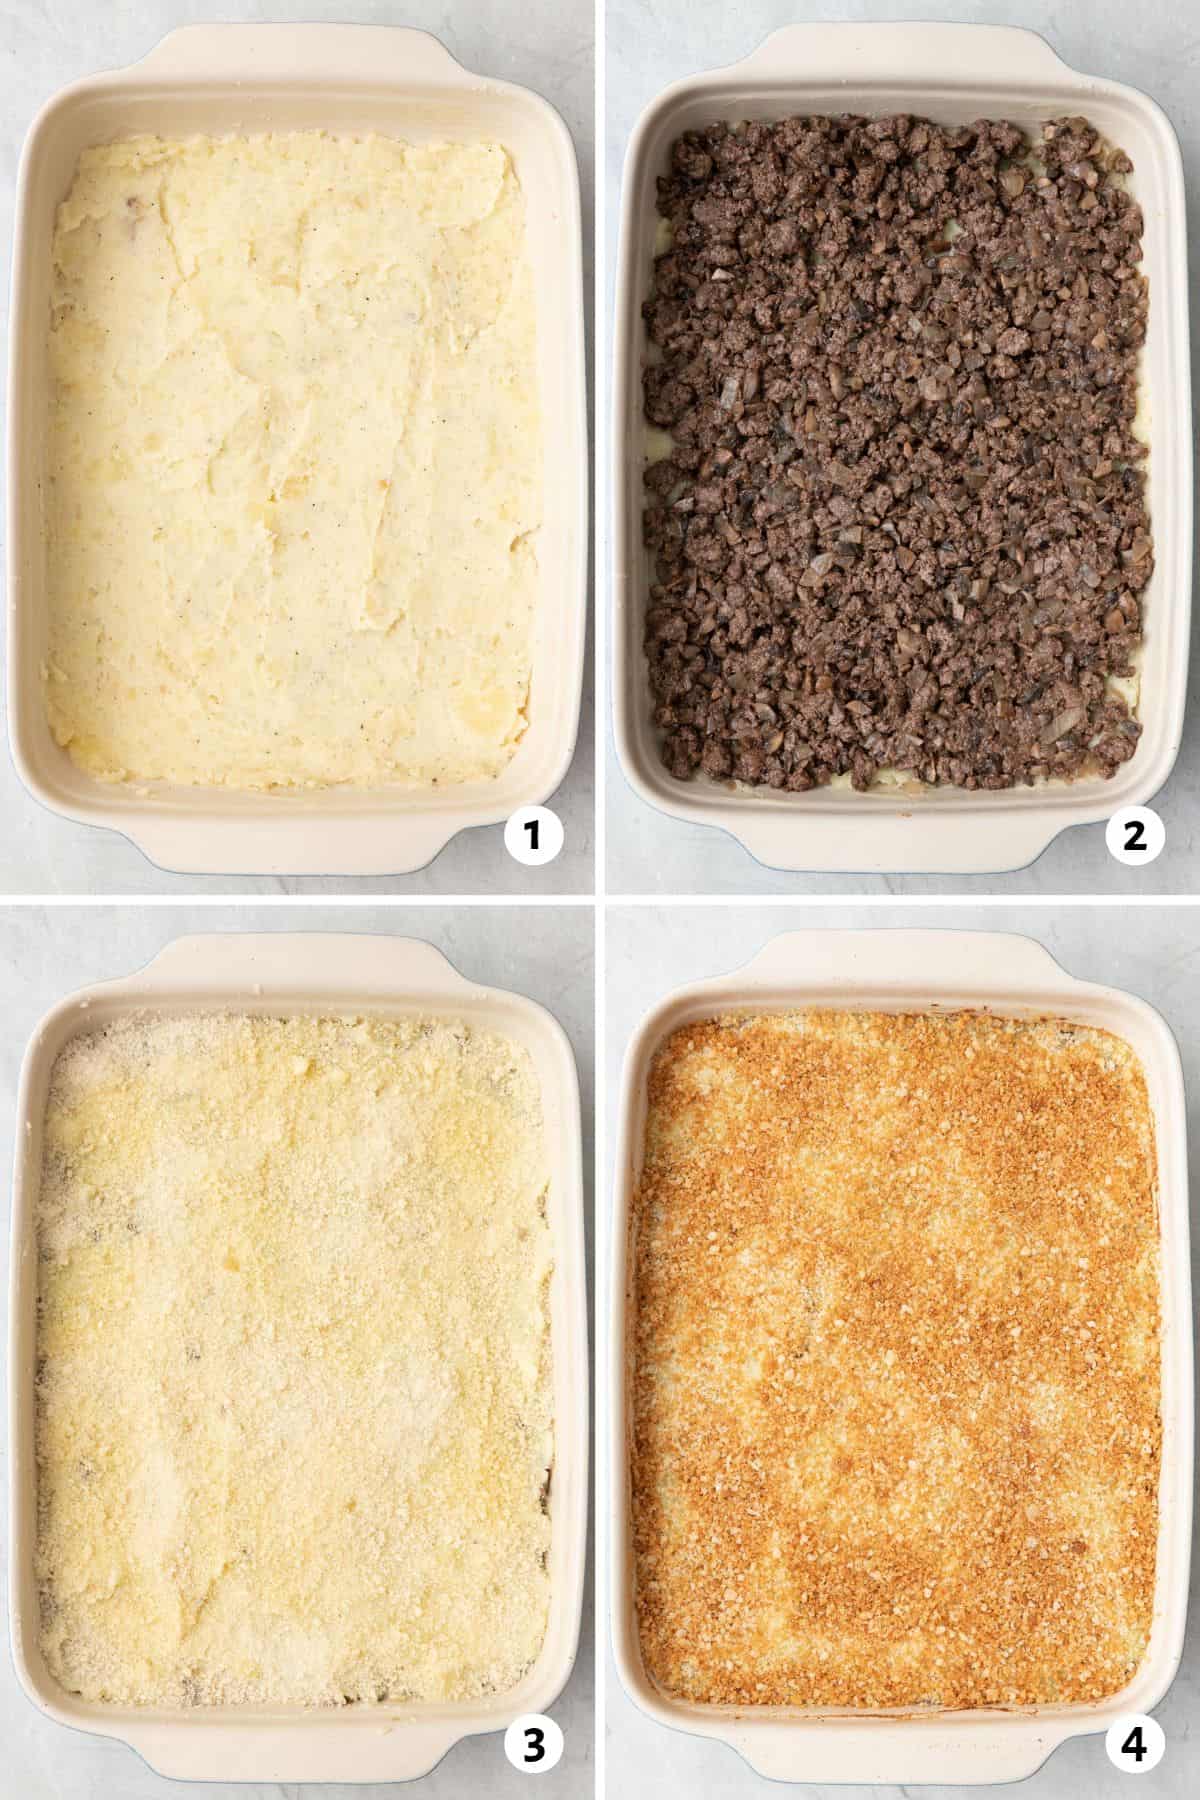 4 image collage adding recipe to baking dish: 1- mashed potatoes added, 2- spiced beef mixture added, 3- remaining mashed potatoes added with breadcrumbs on top, 4- after baking with golden brown top.